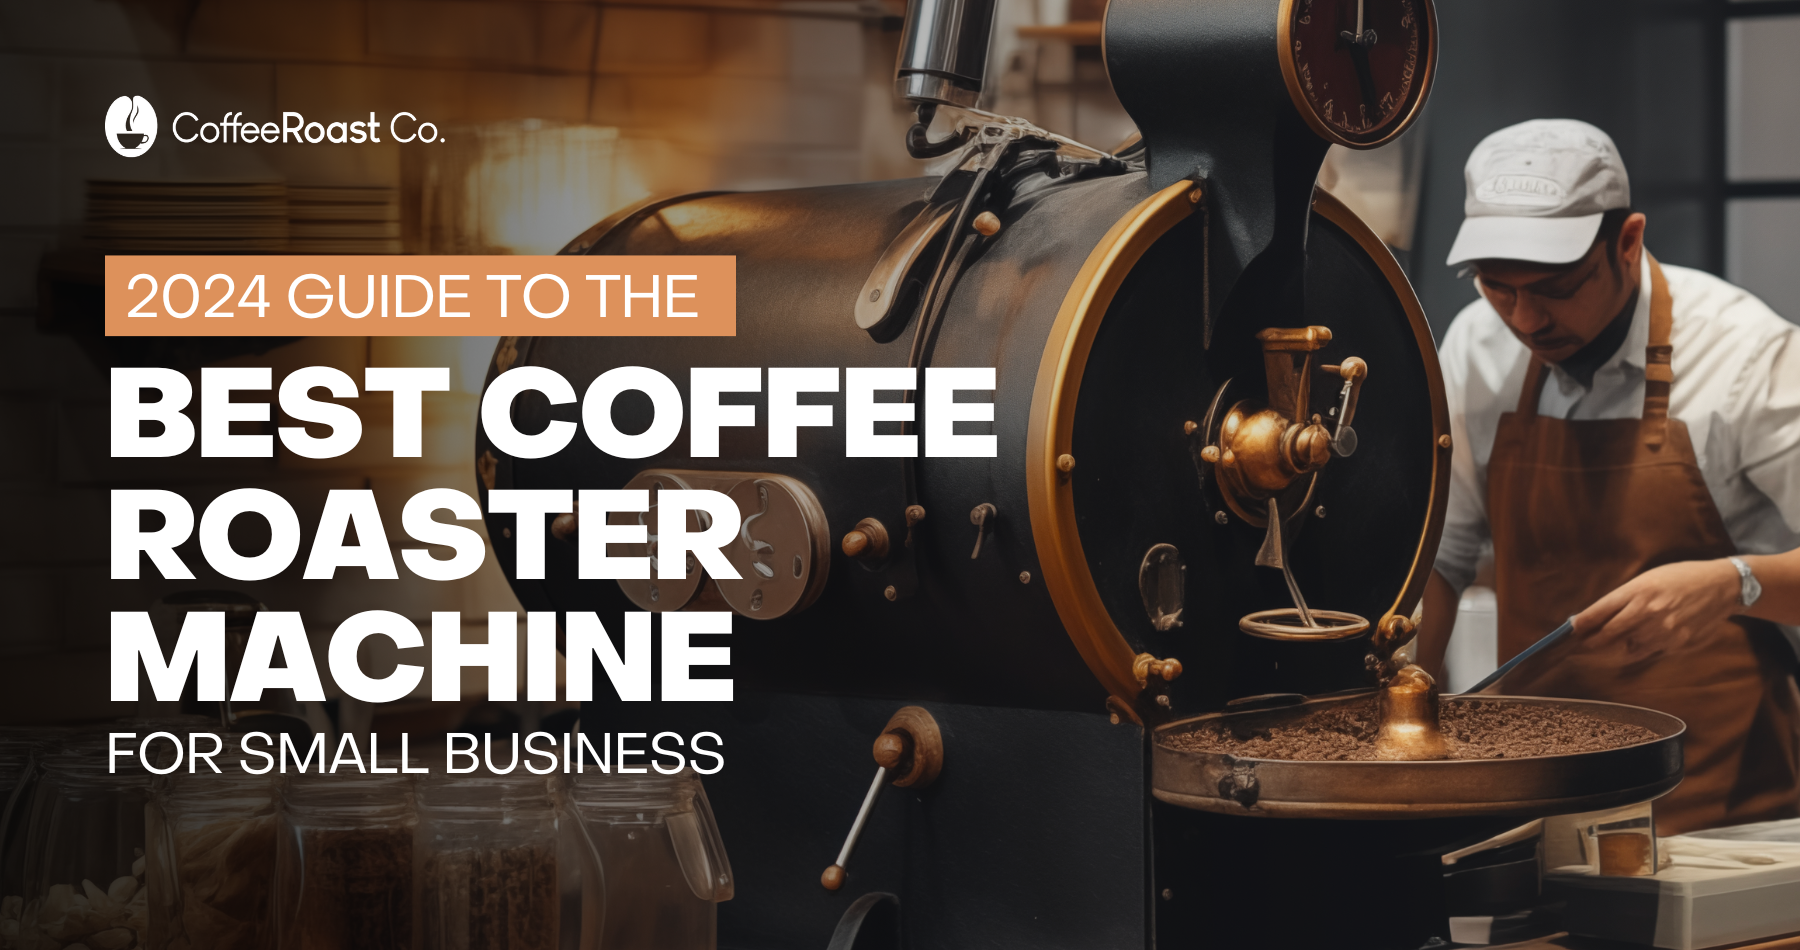 2024 Guide to the Best Coffee Roaster Machine for Small Business